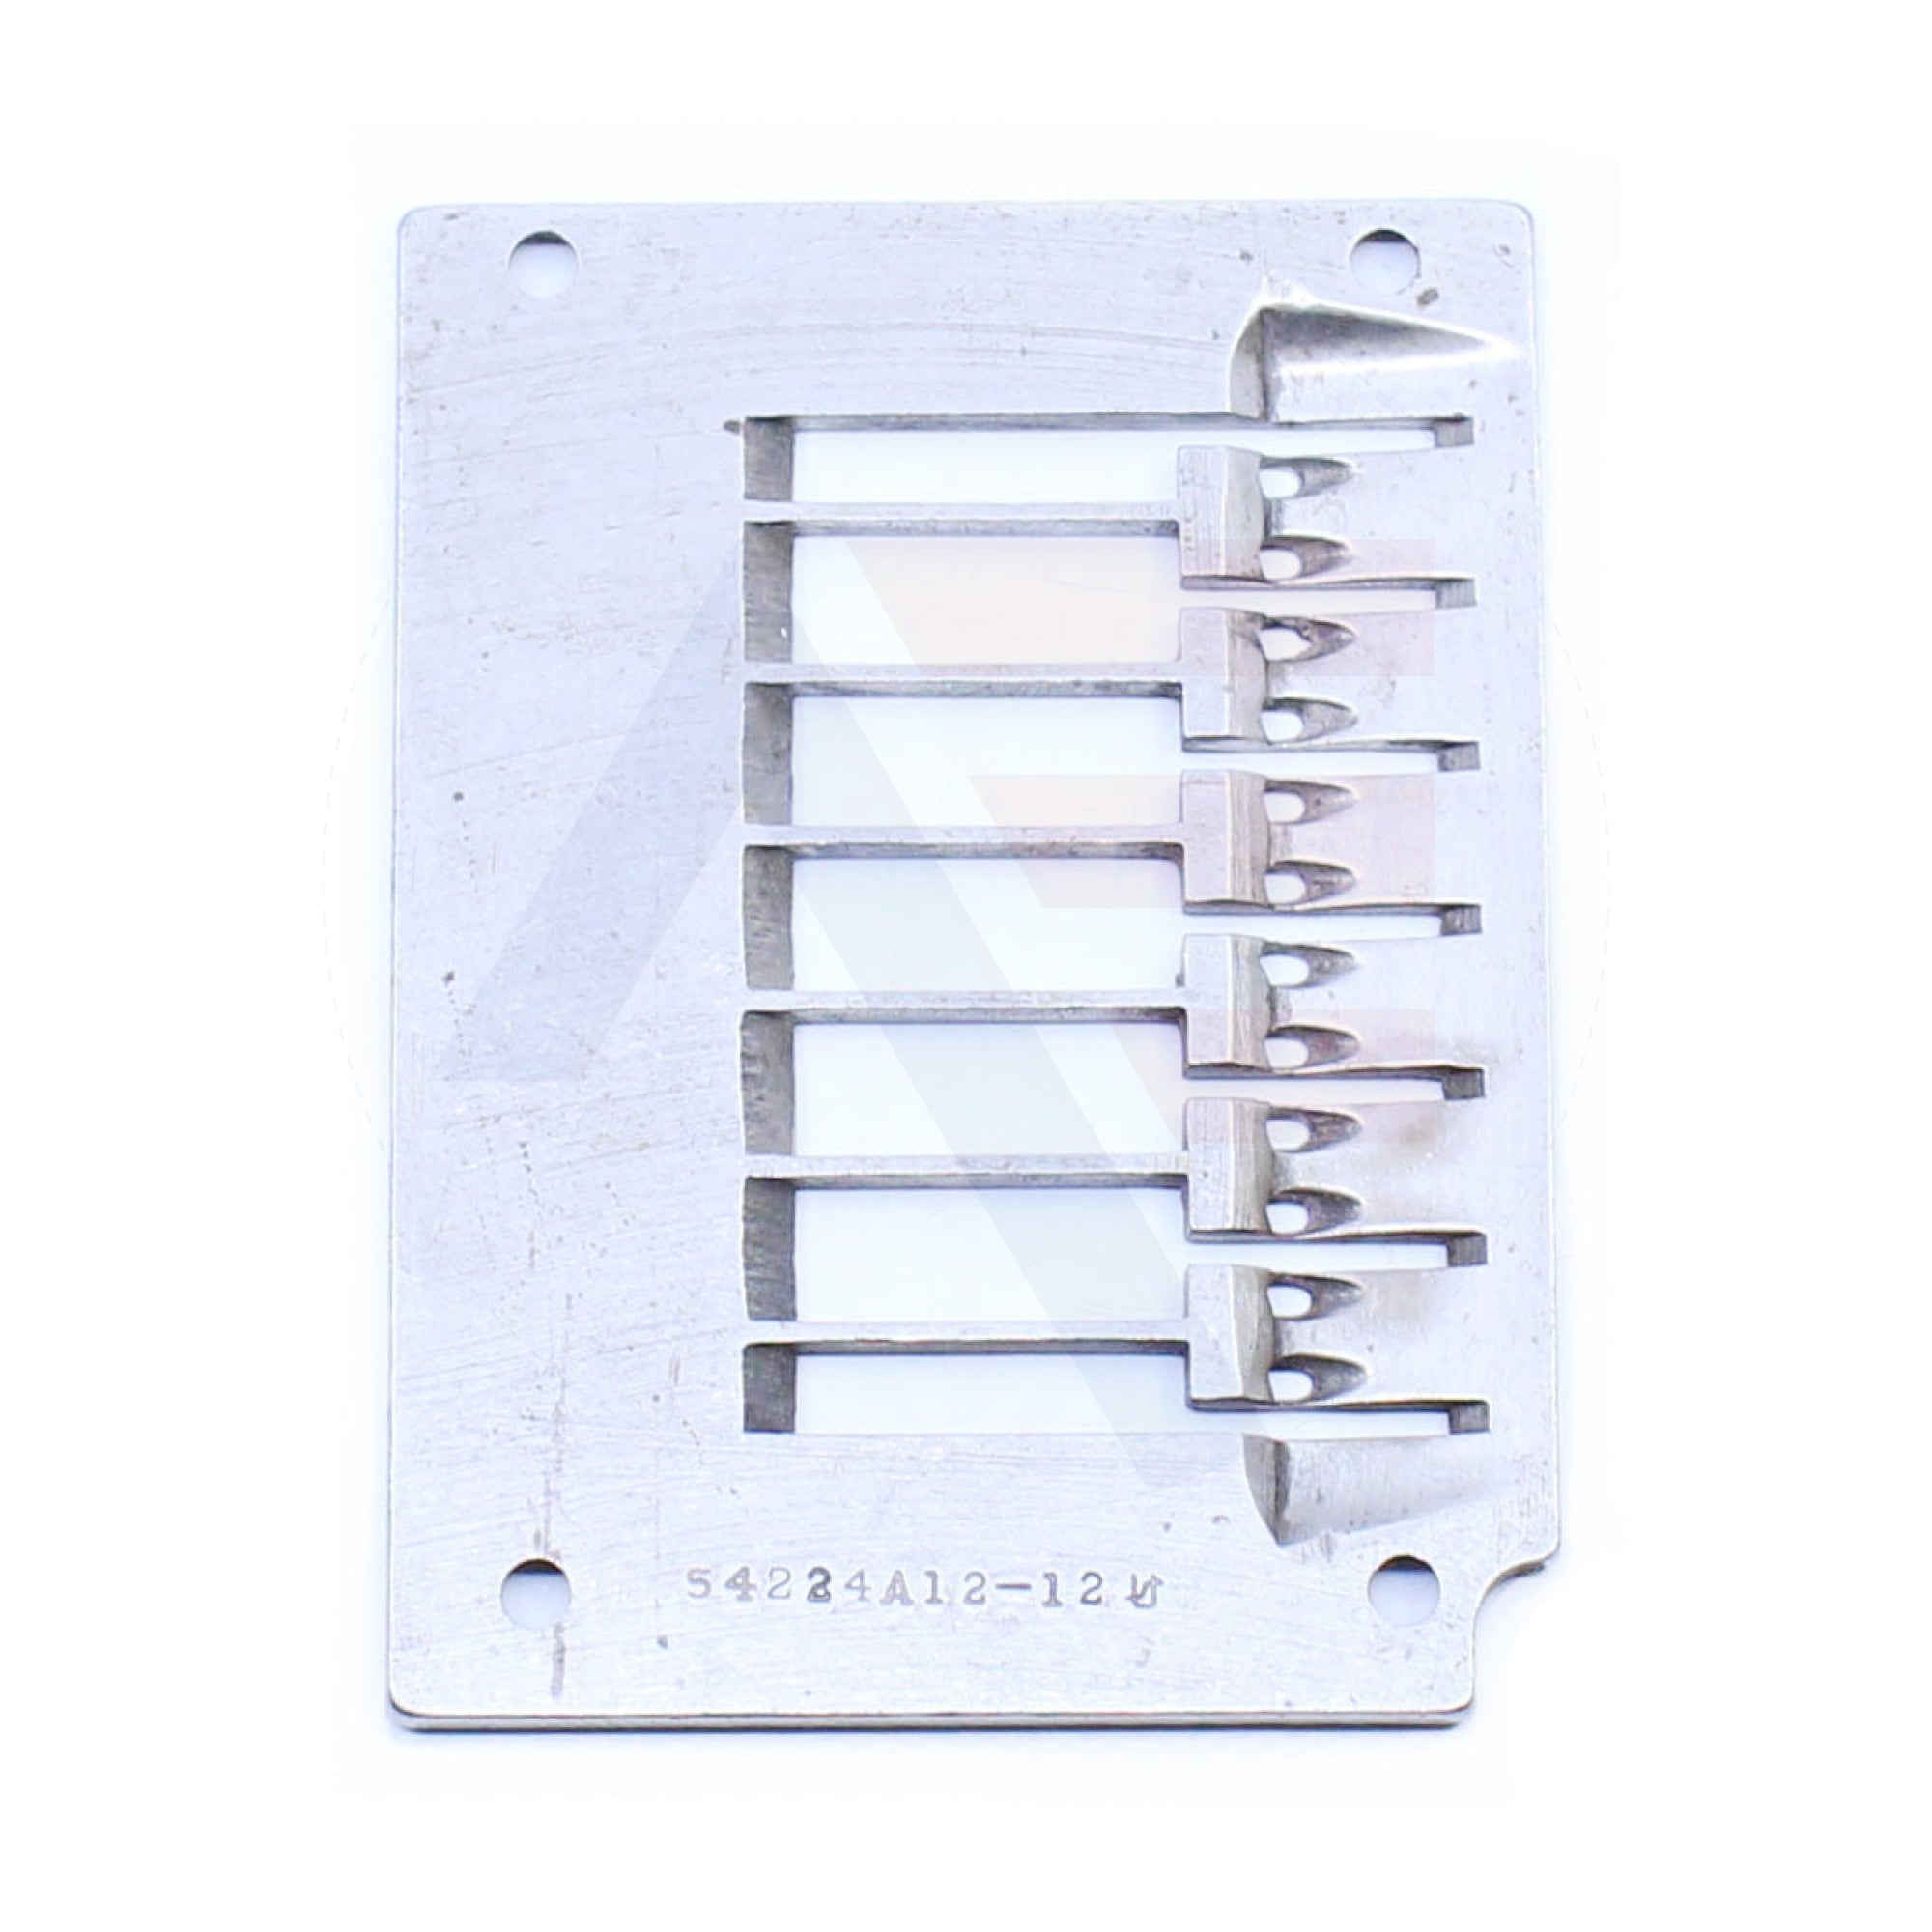 54224A1212 Needle Plate